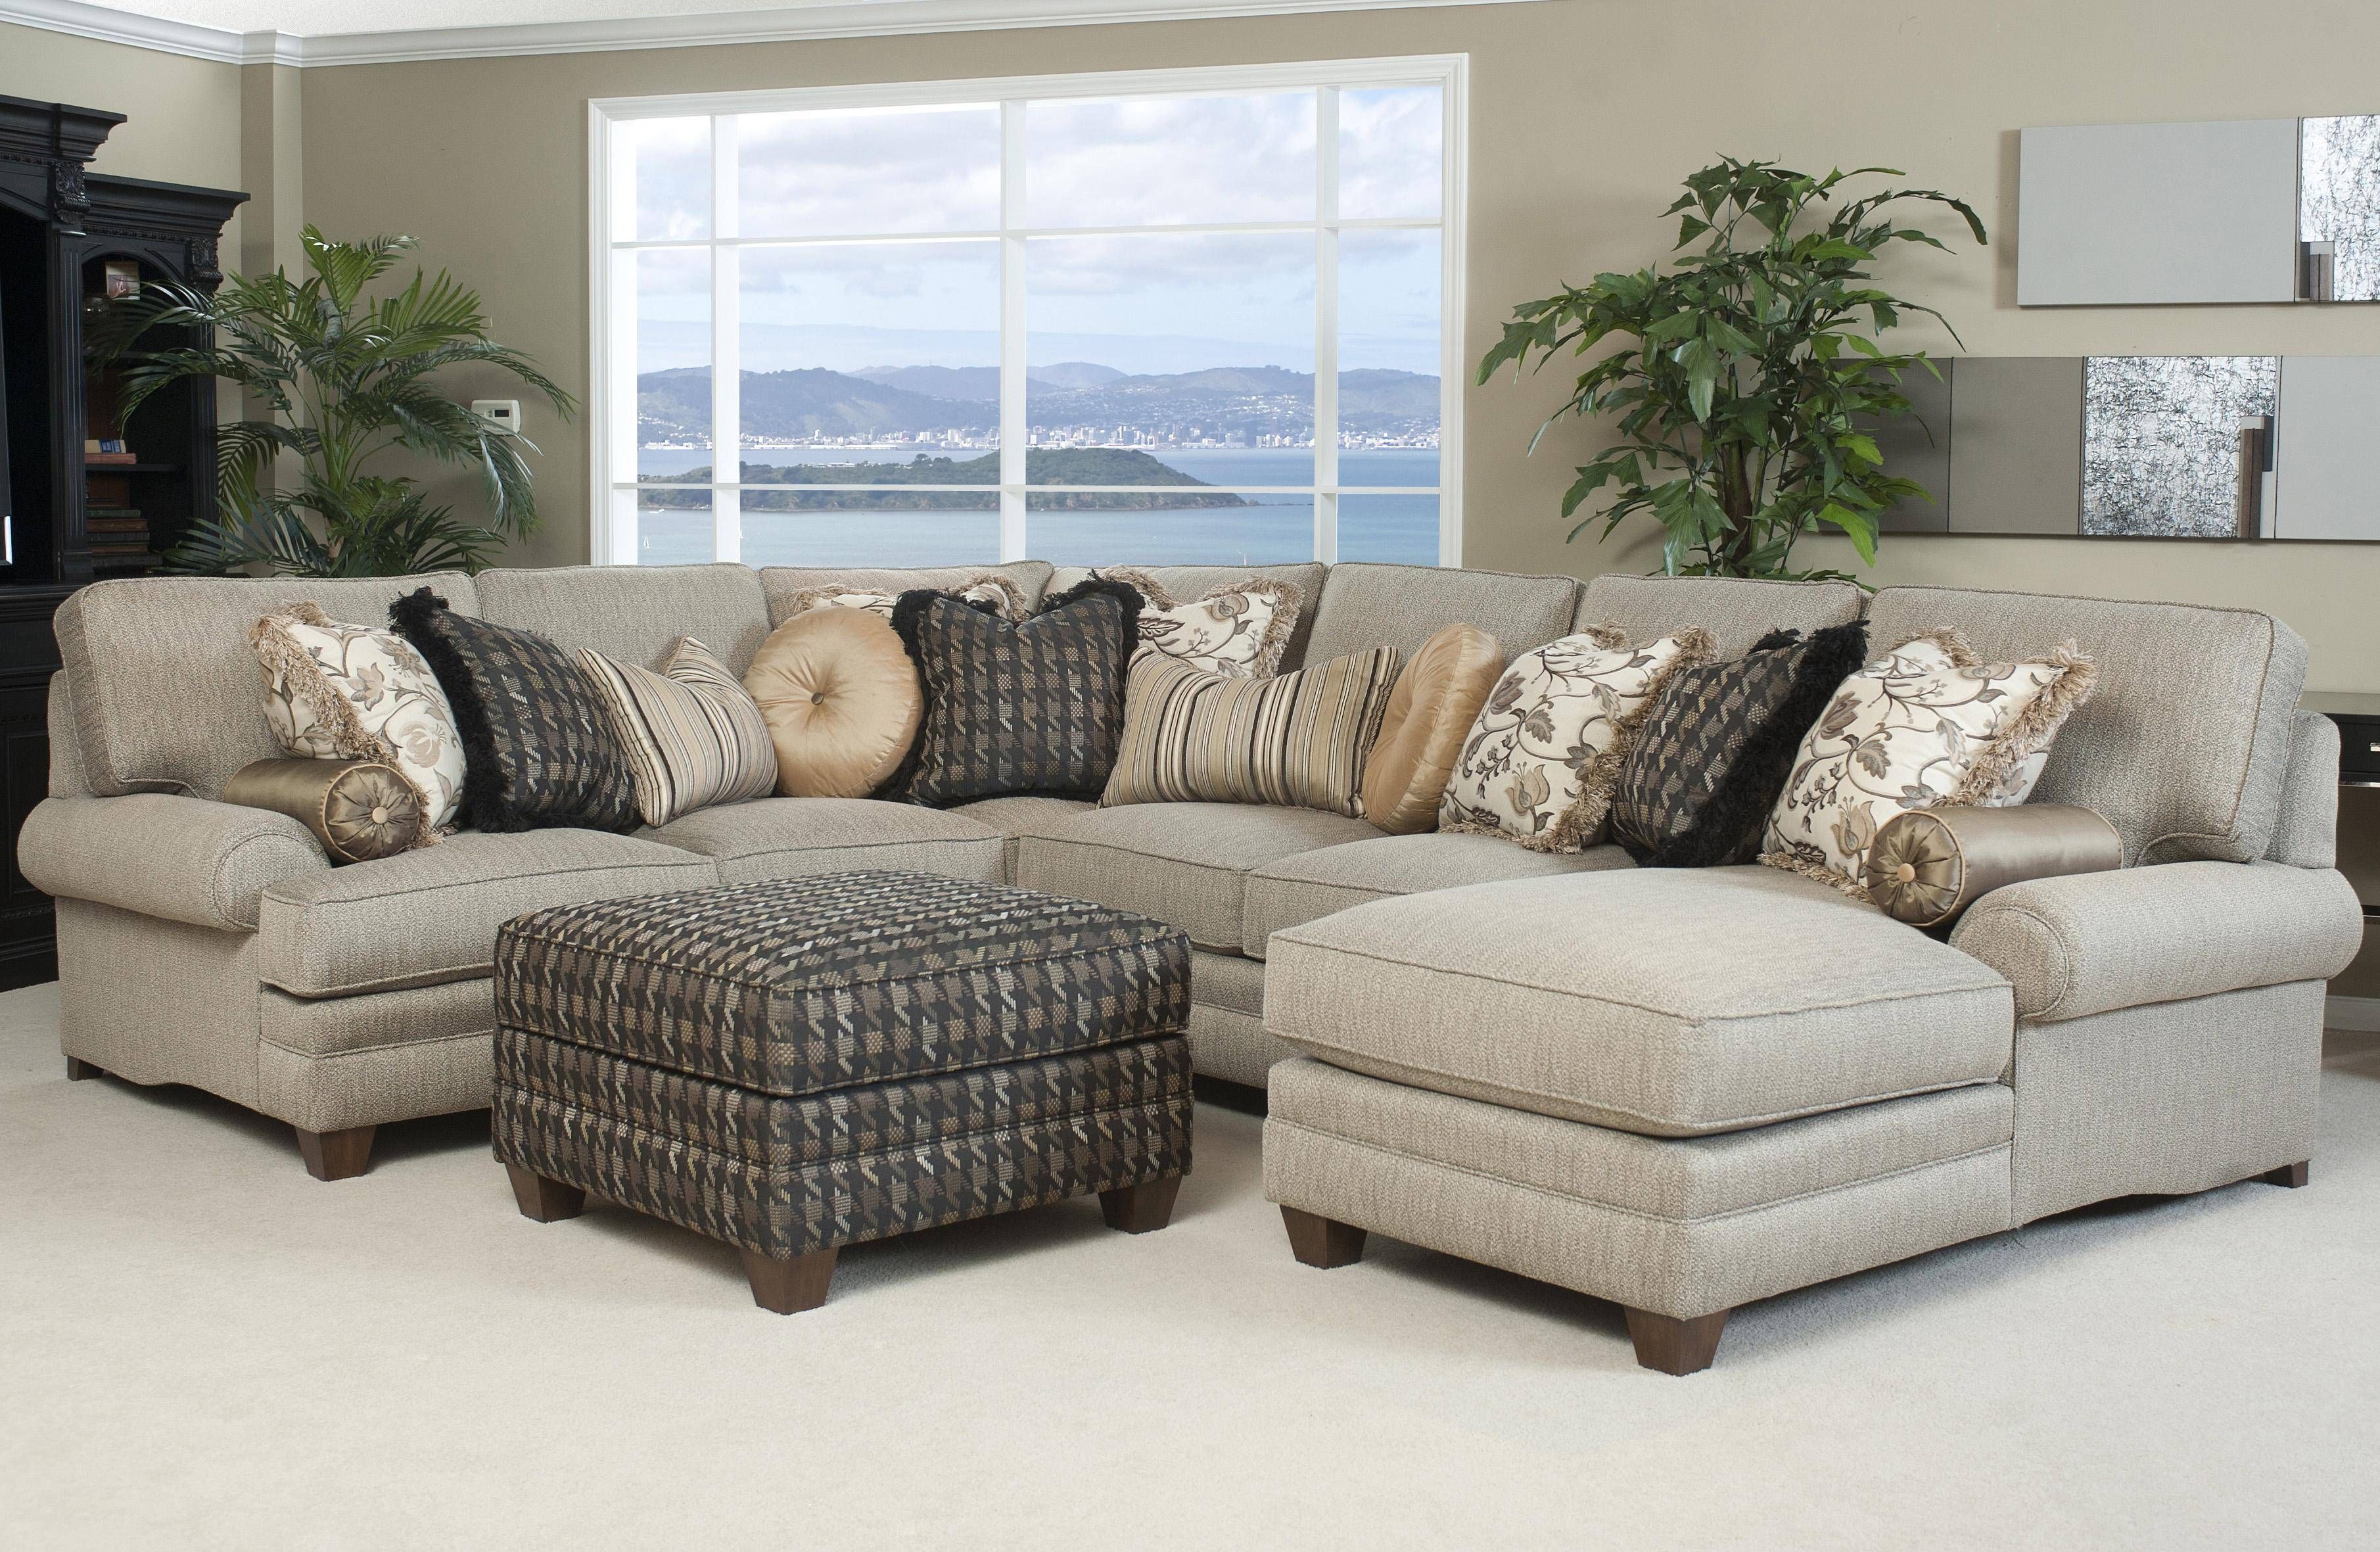 Traditional Styled Sectional Sofa With Comfortable Pillowed Seat For Traditional Sectional Sofas Living Room Furniture (View 4 of 25)